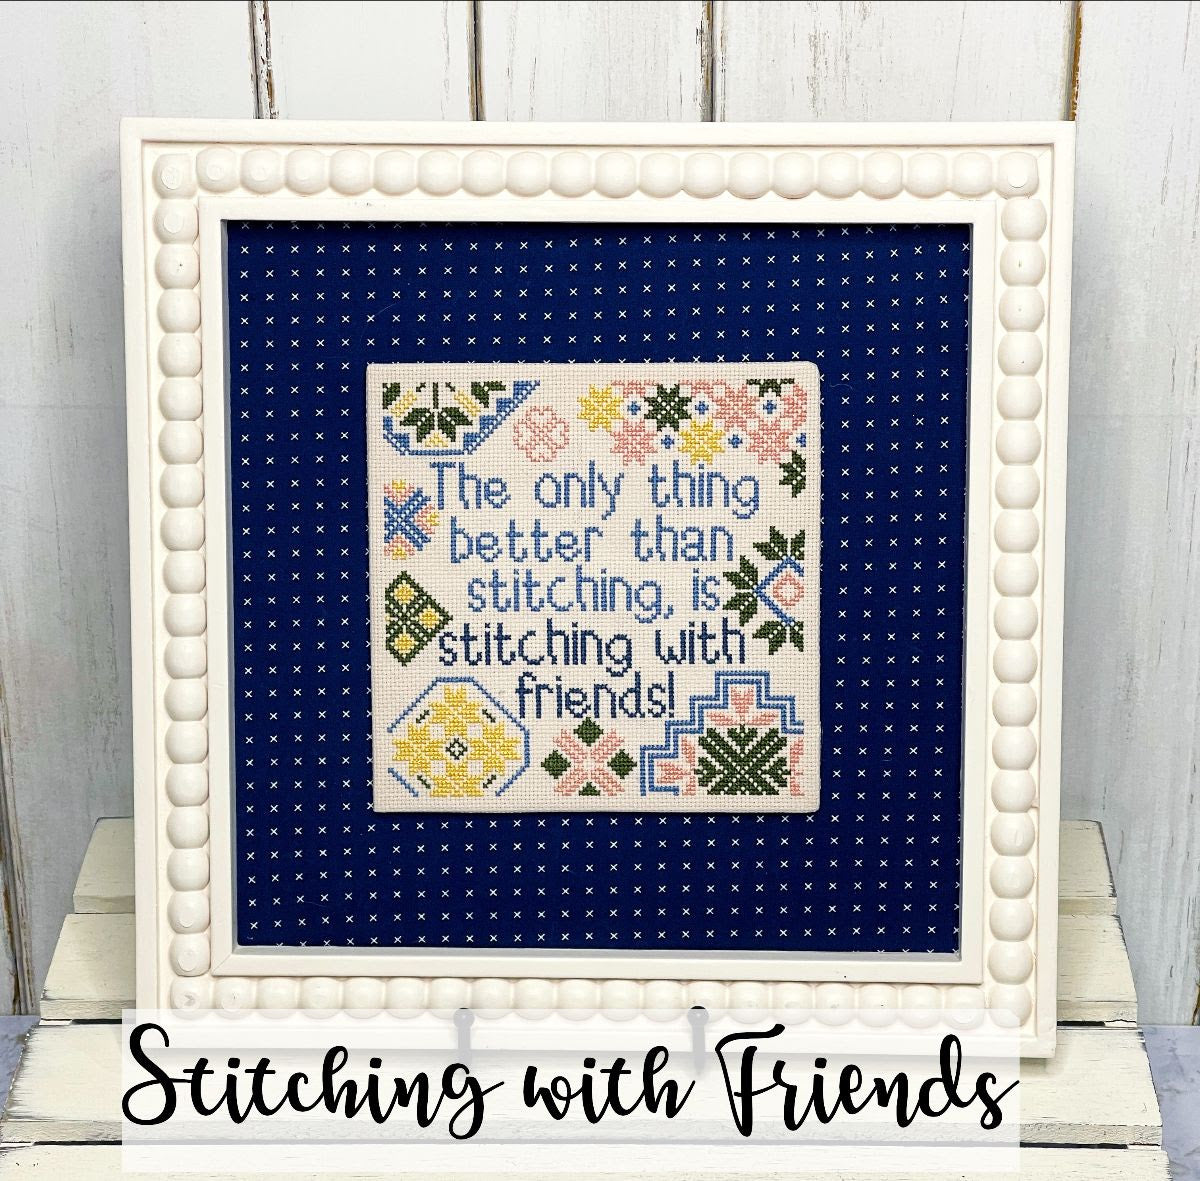 Stitching With Friends by Little Stitch Girl